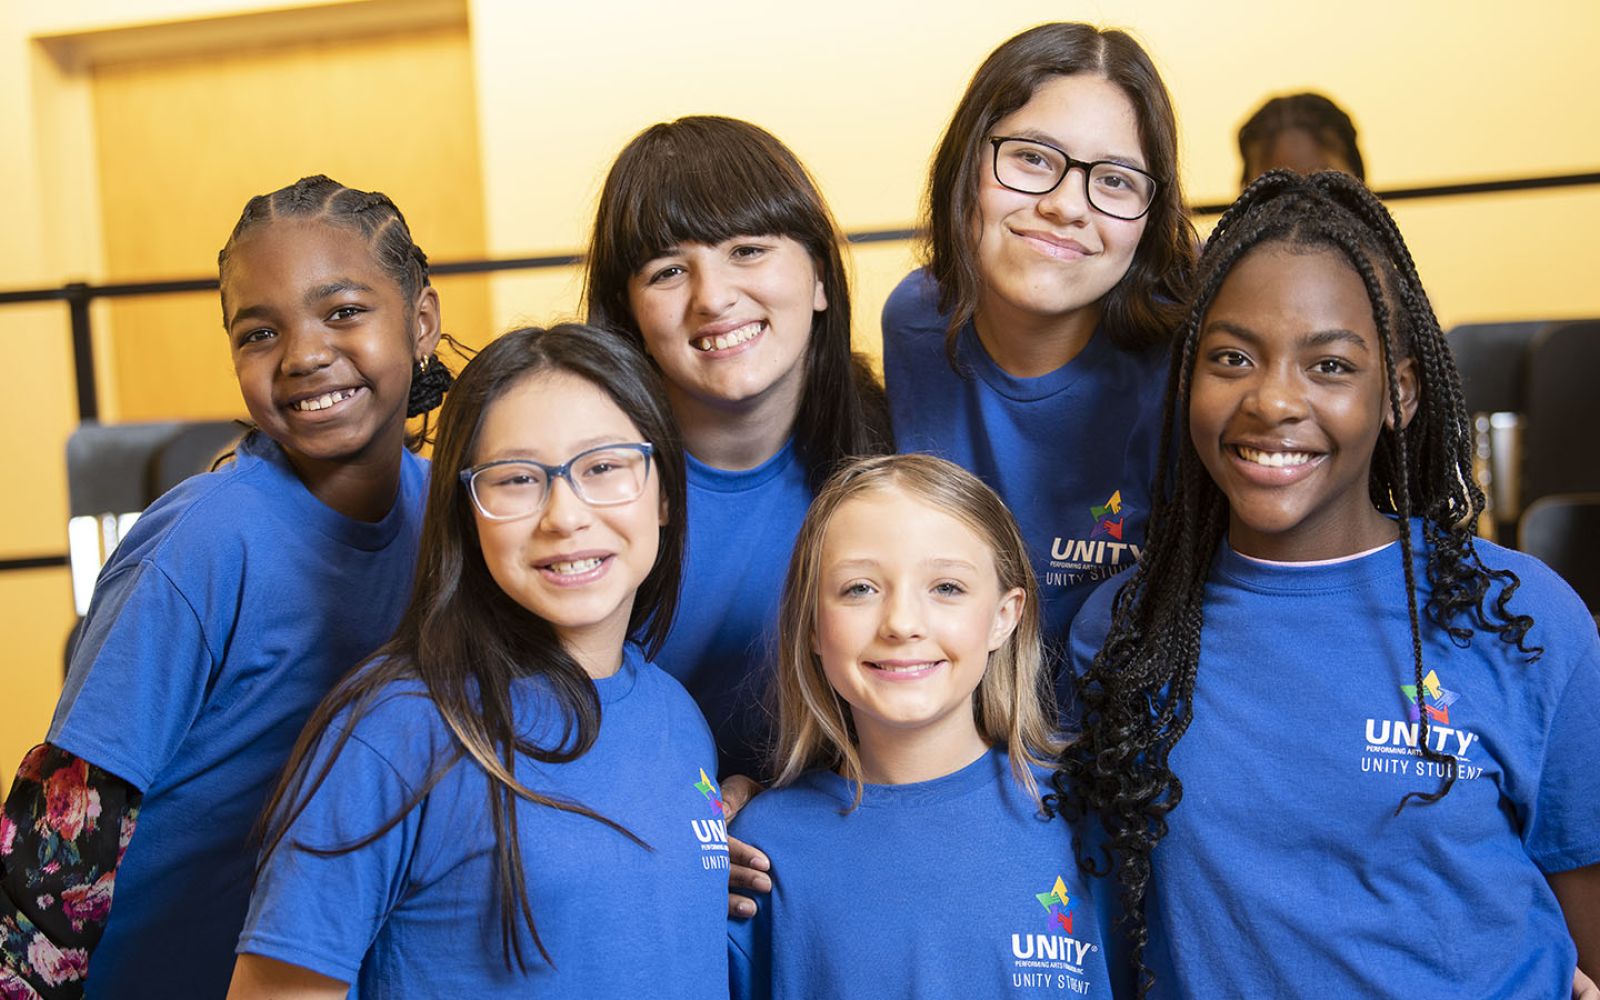 Unity Performing Arts Foundation's Voices of Unity Youth Choir will perform a Rise Up Concert on Saturday, June 22, at PFW Music Center ahead of their trip to Auckland, New Zealand, for the World Choir Games in July.